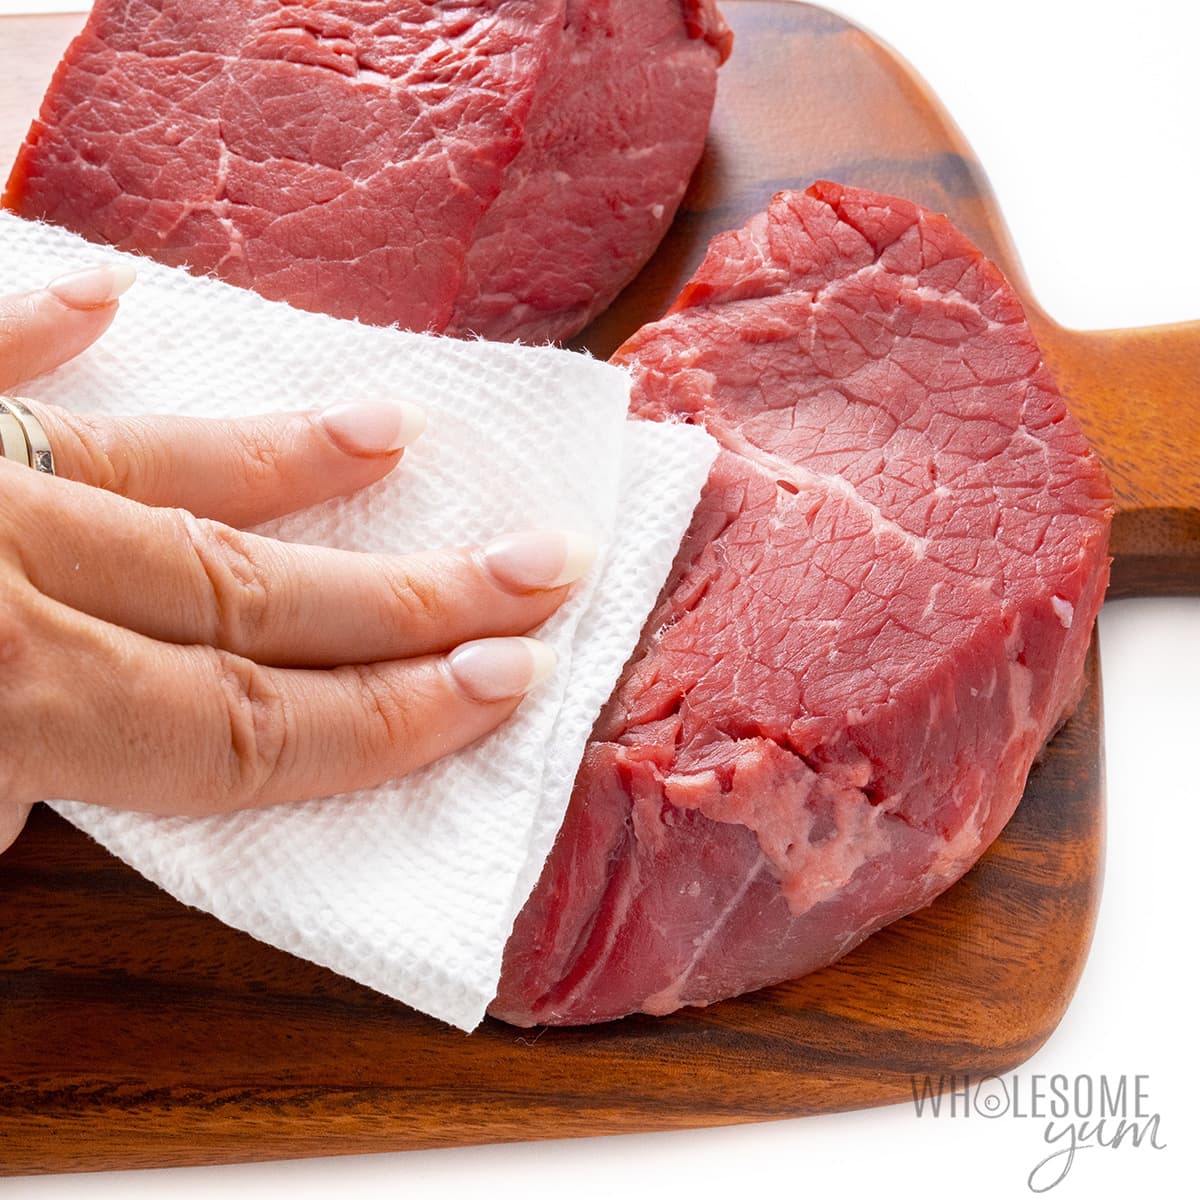 Steaks patted dry with a paper towel.